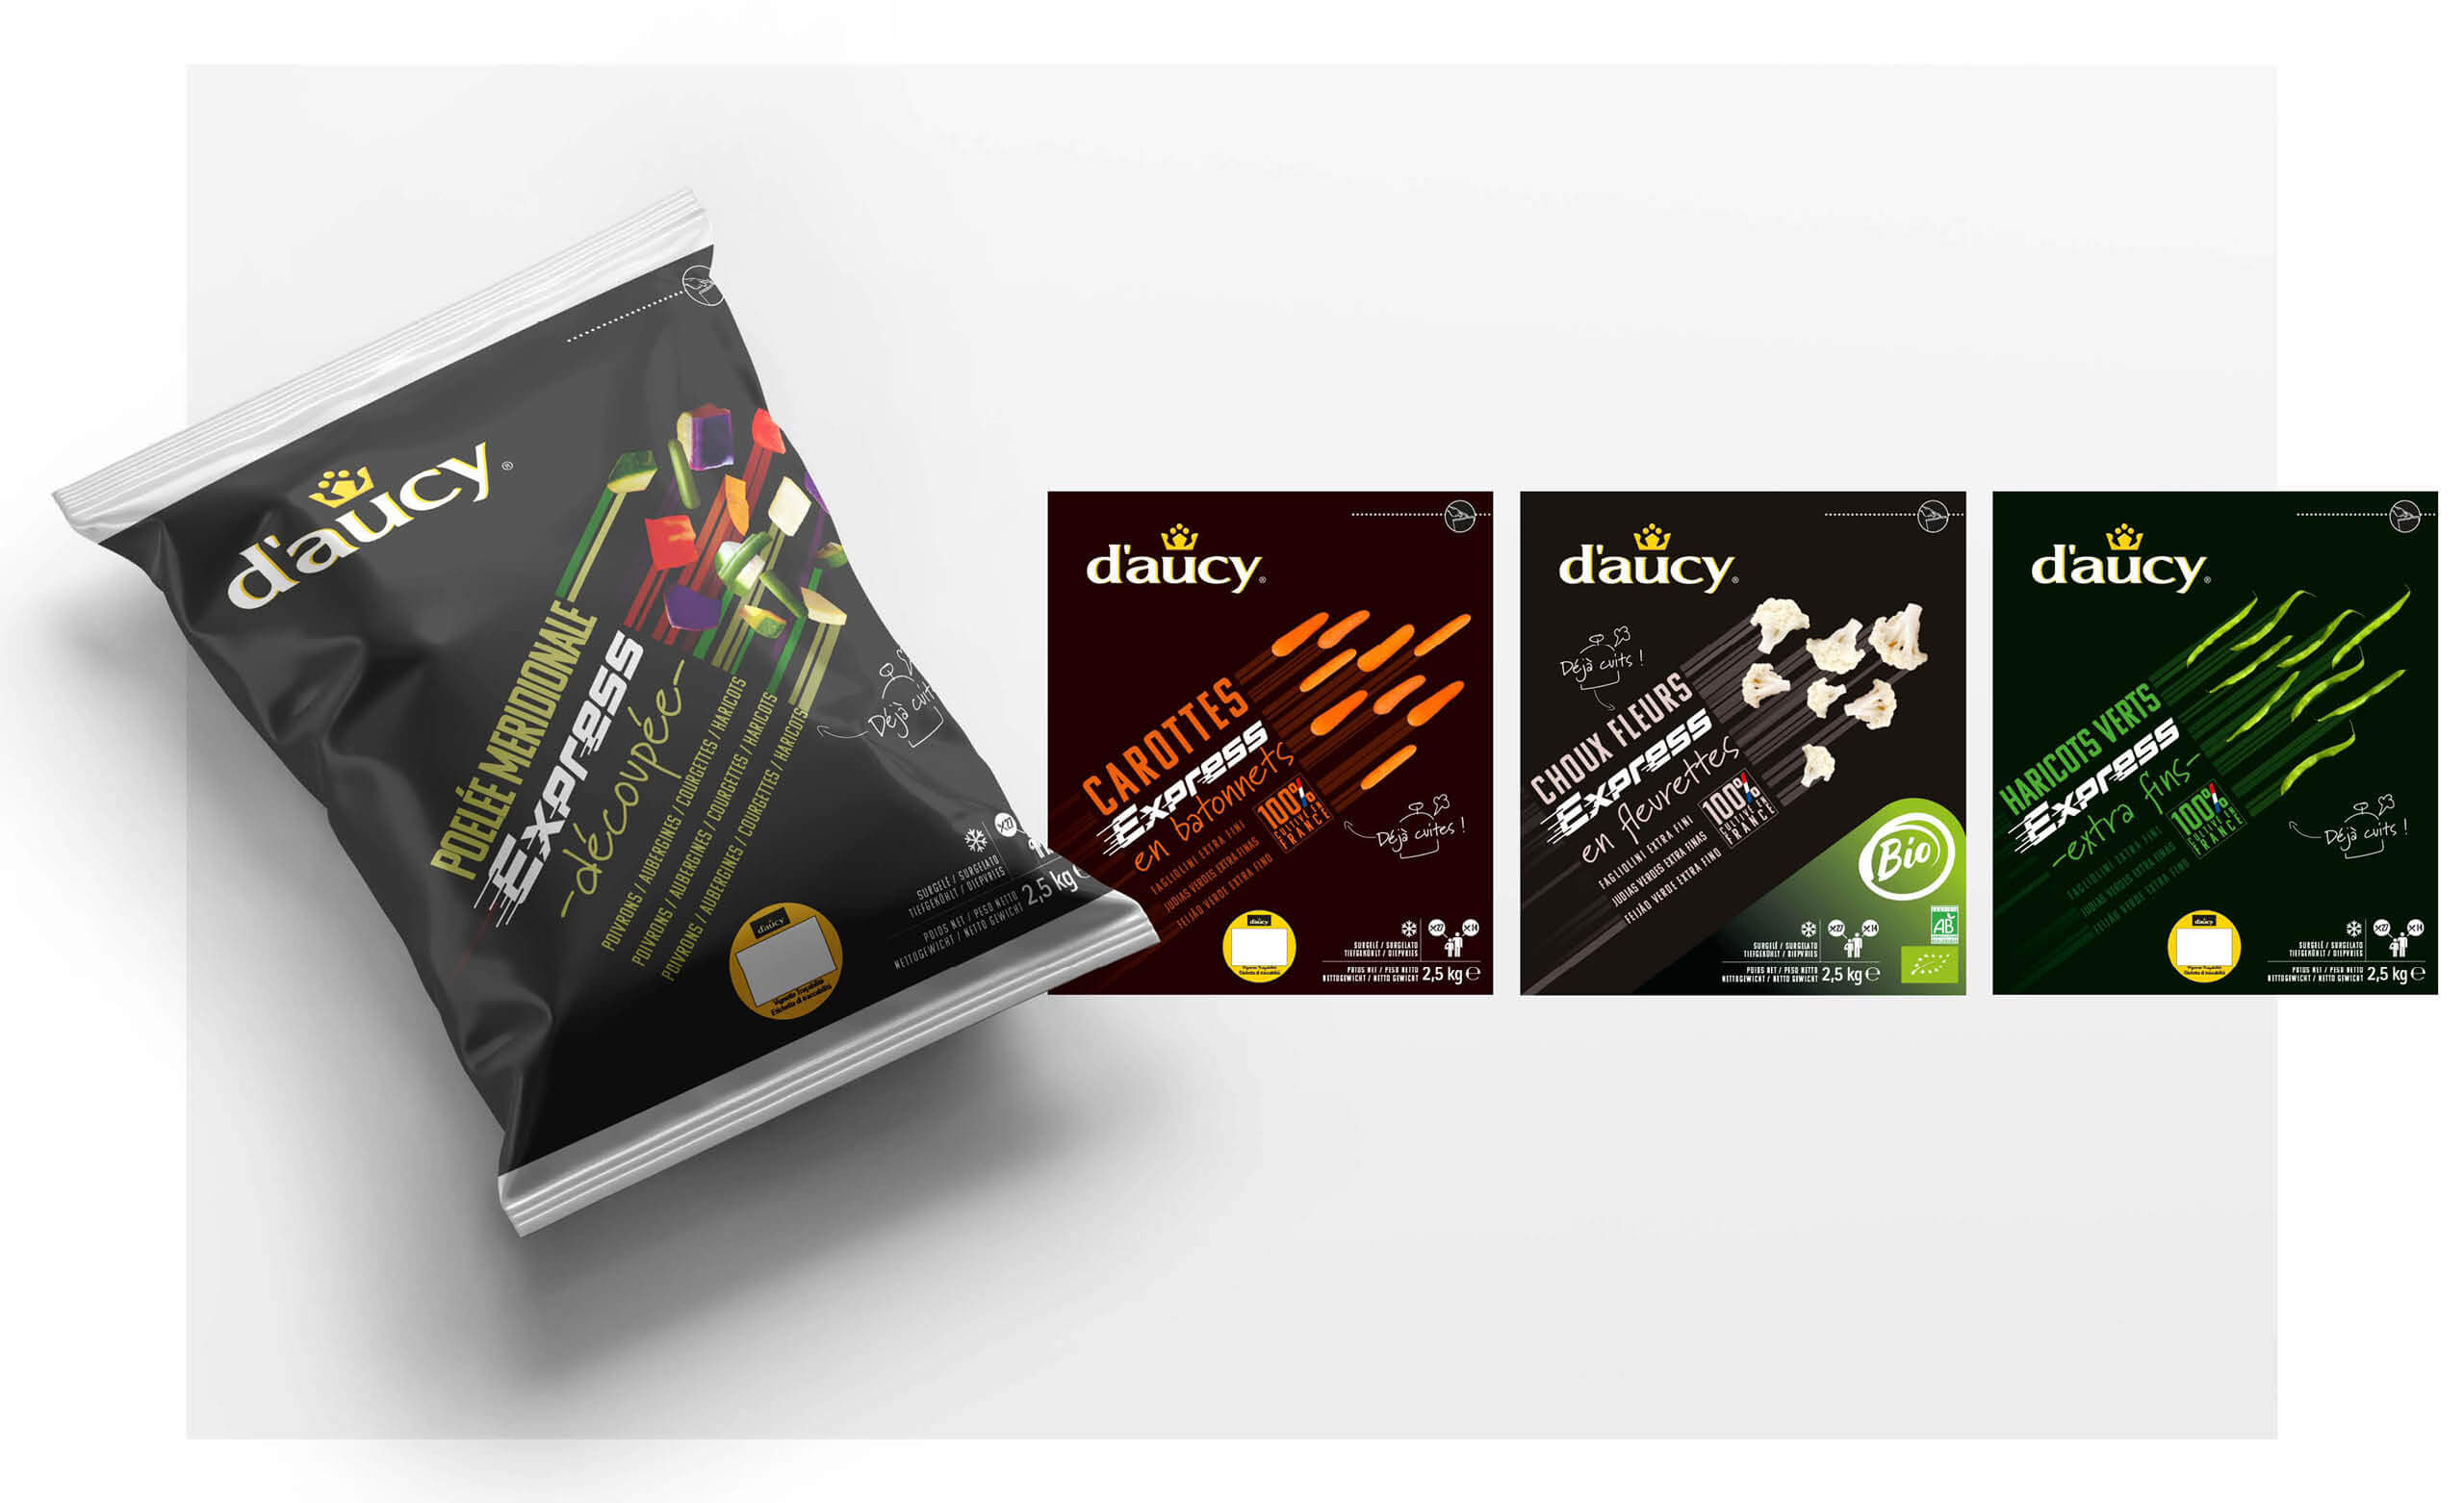 Proposition refonte charte packaging d'aucy